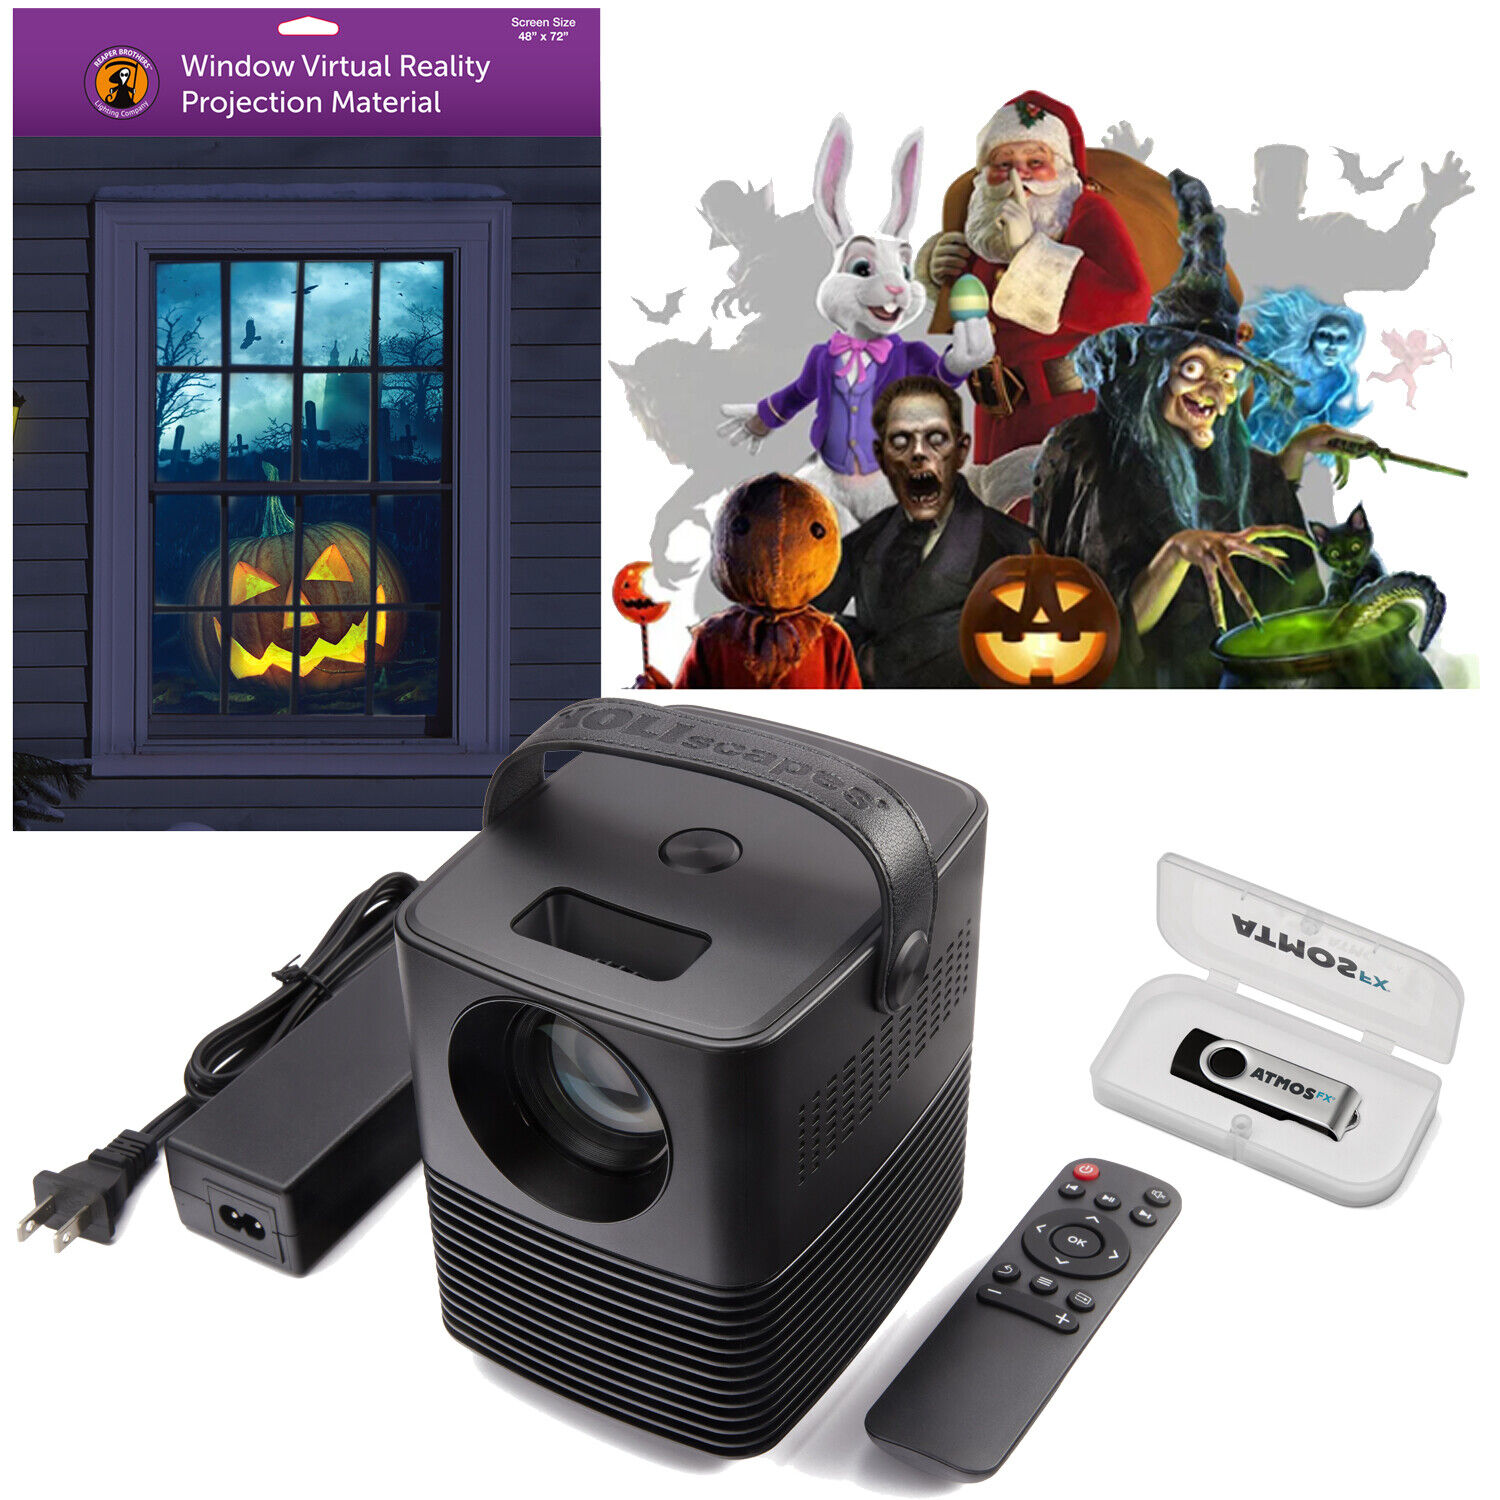 AtmosFX Holiday Digital Decoration Kit - Videos, Screen & Projector included